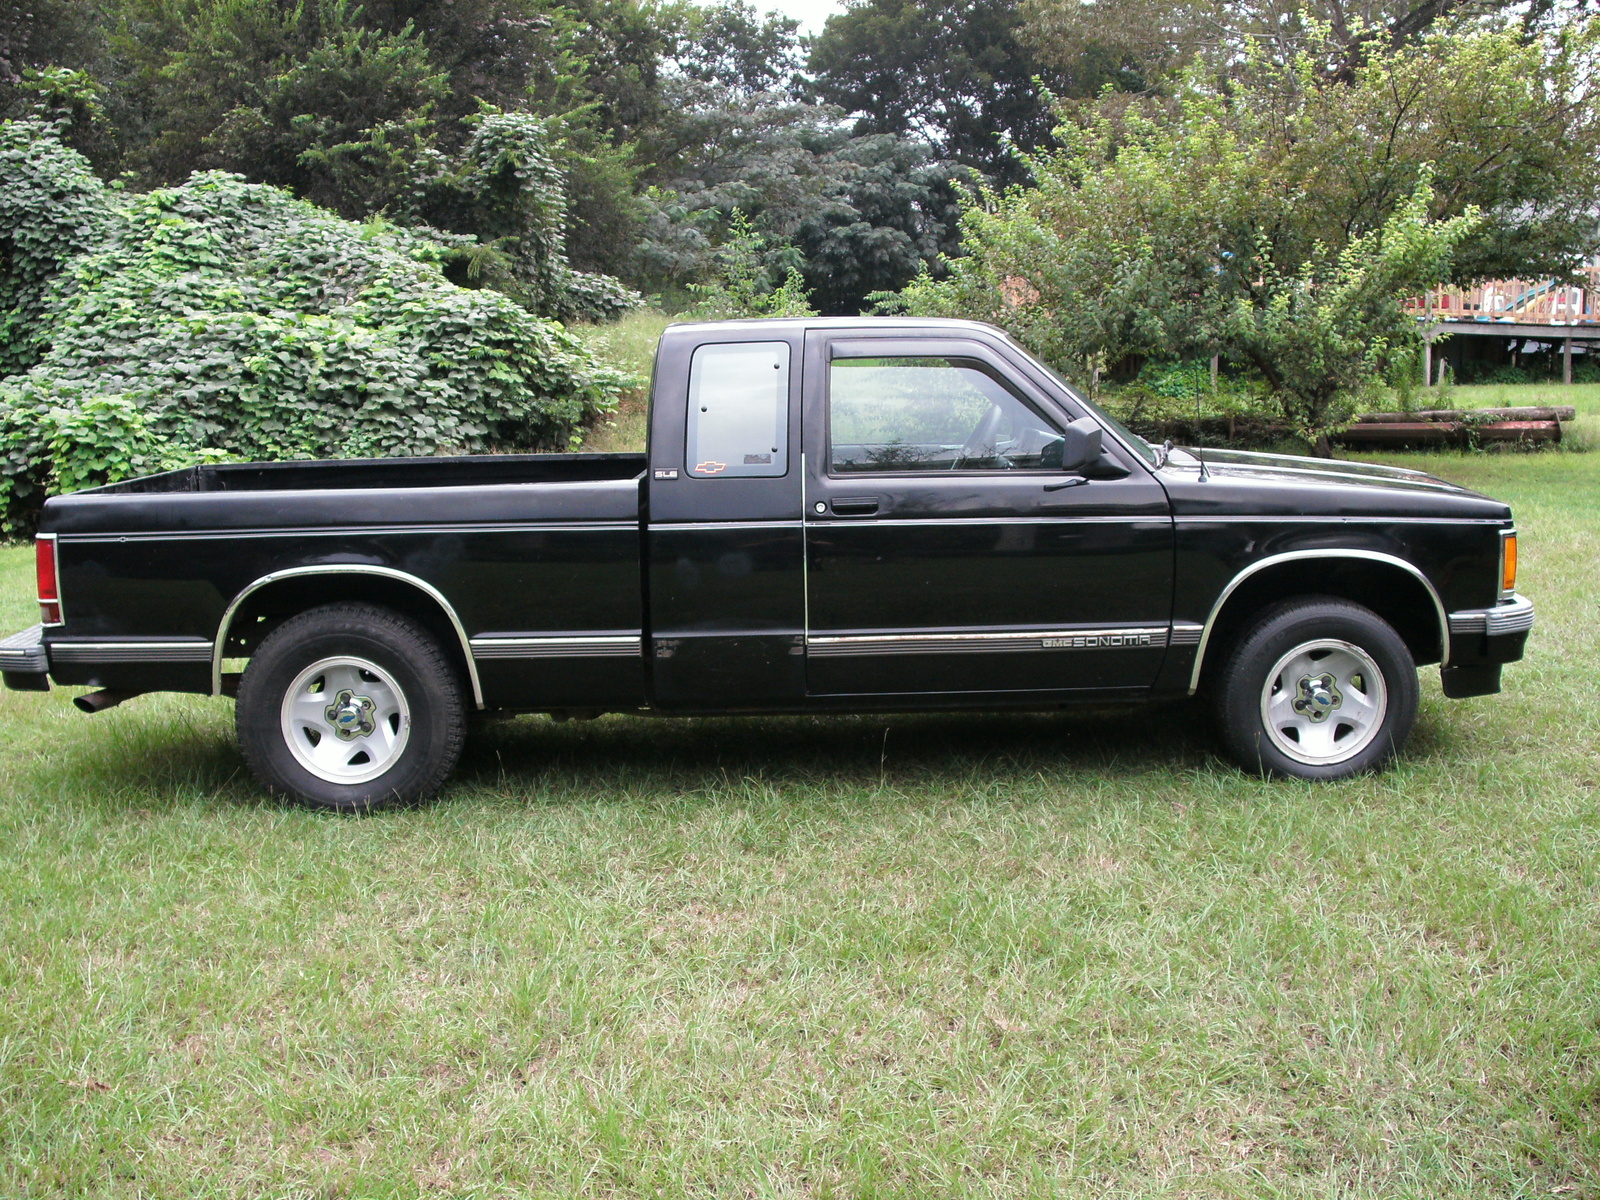 1991 Gmc sonoma extended cab #5